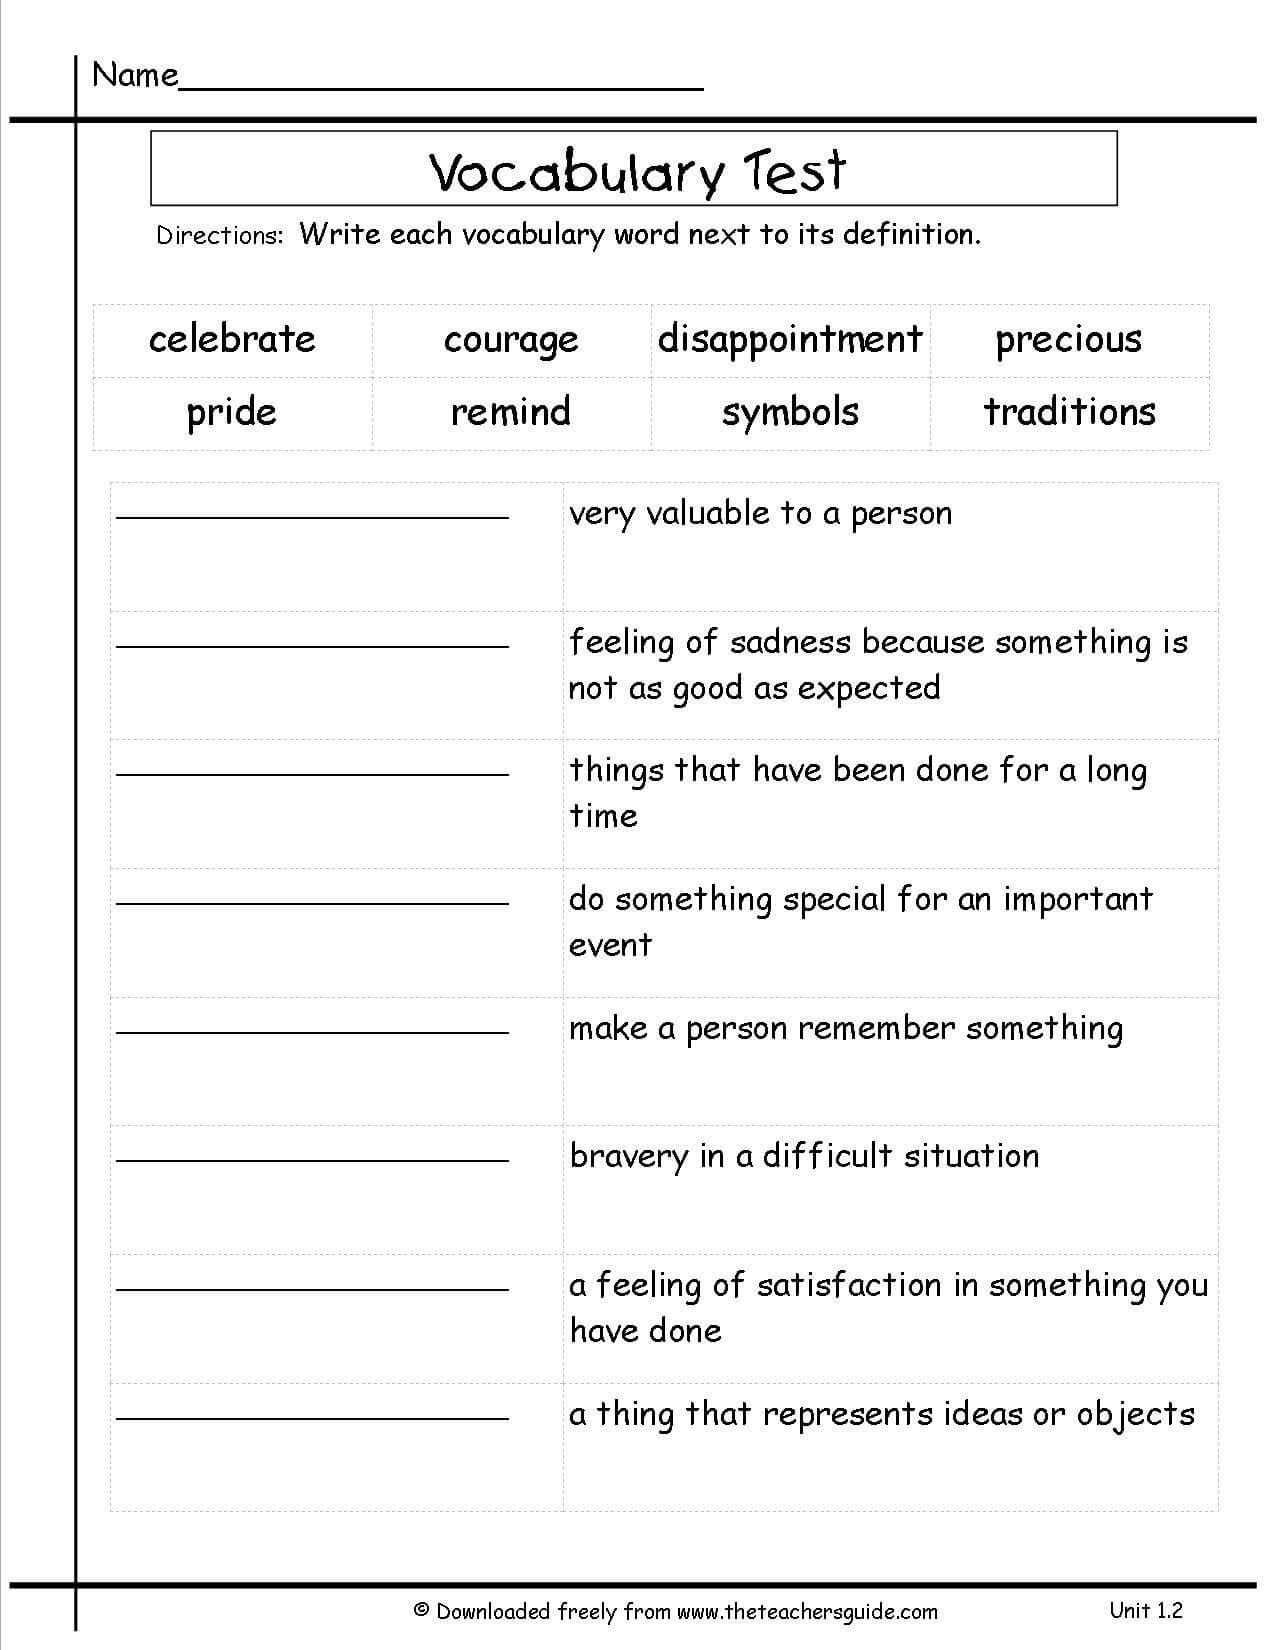 Pin On Education Reading With Vocabulary Words Worksheet Template